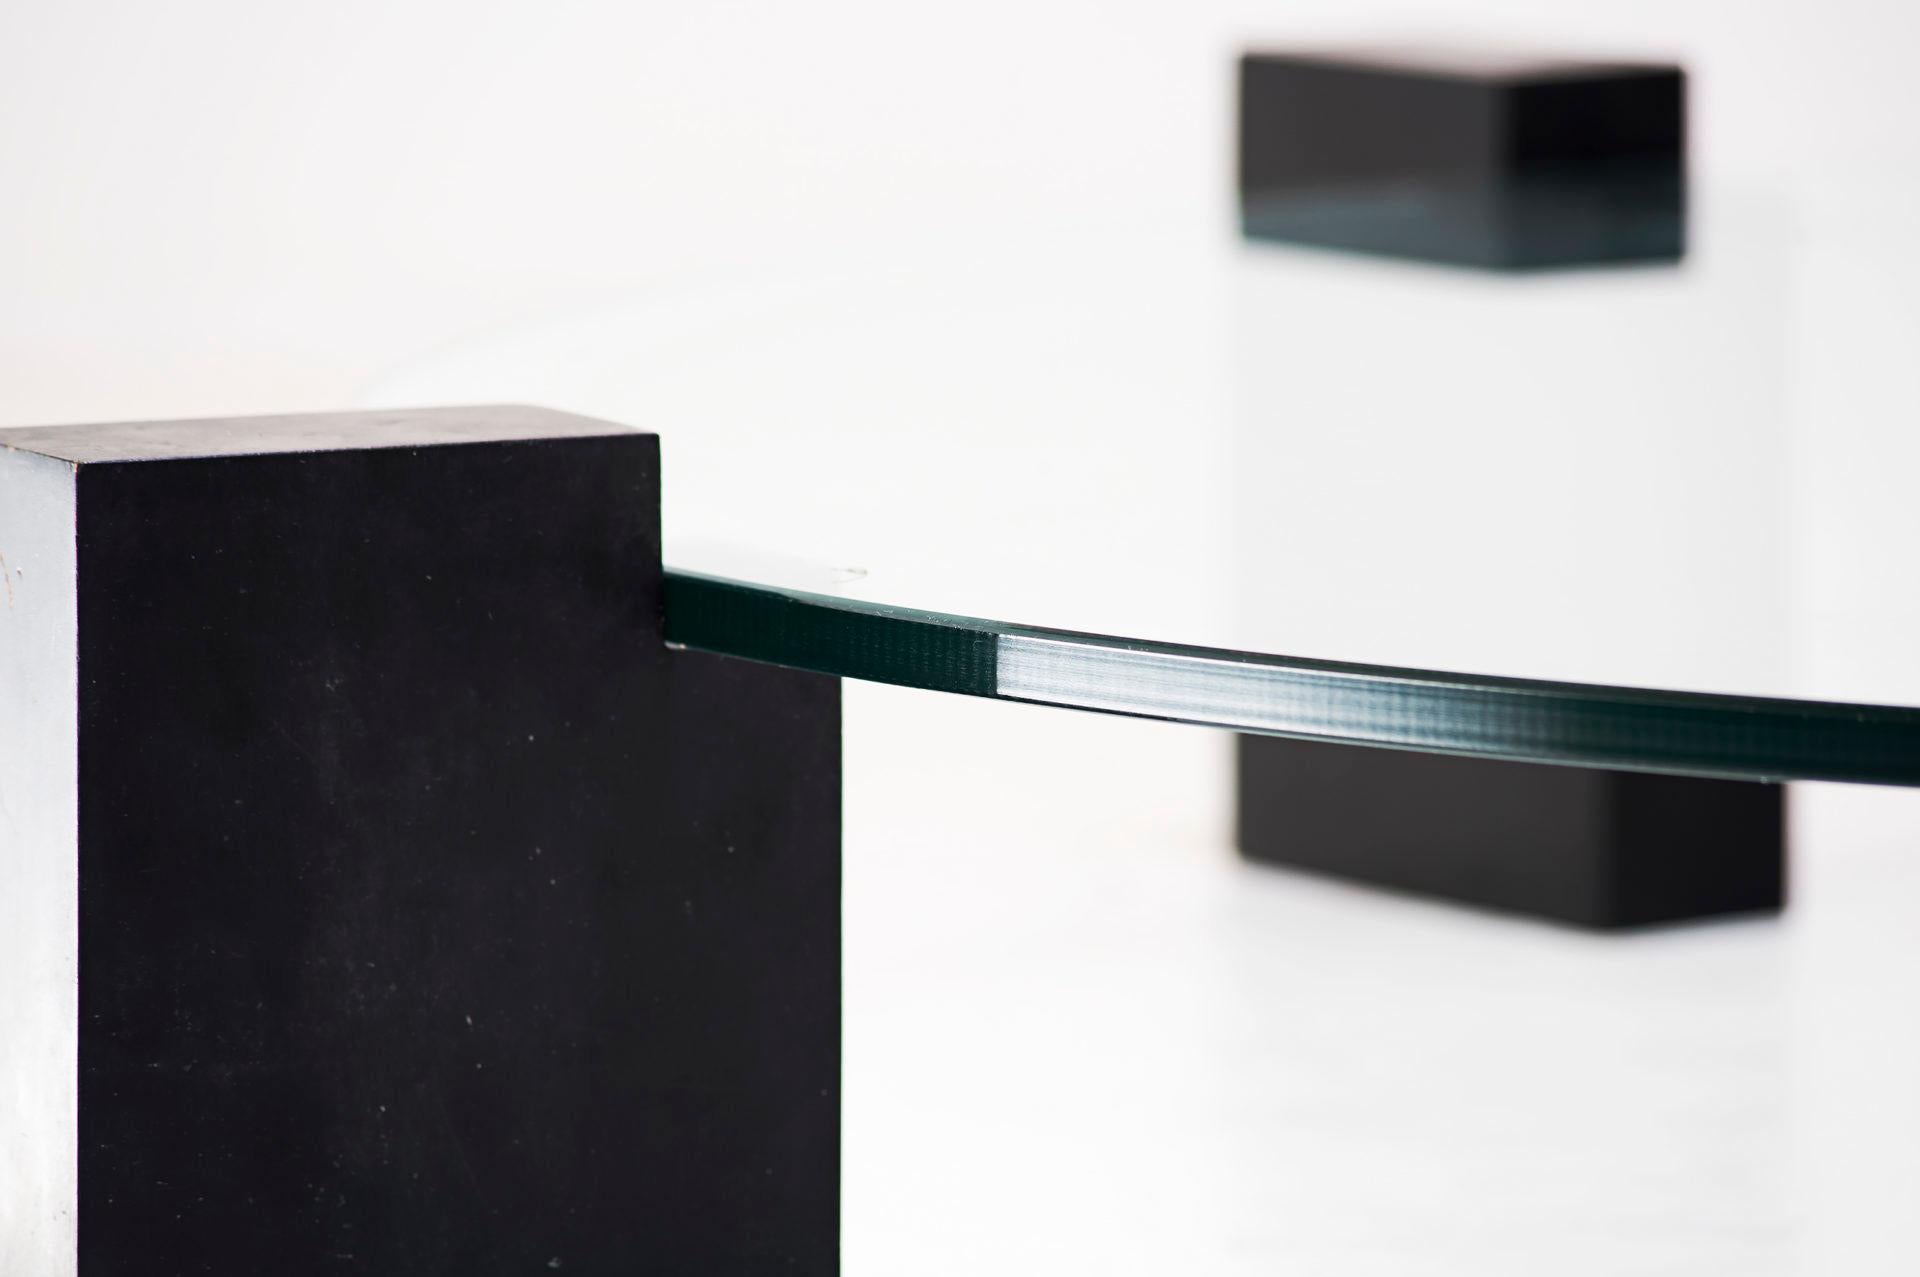 Coffee table
Manufactured by Tepperman
Brazil, 1991
Ebonized wood legs, glass top.

Measurements
130 Ø cm x 20,3h cm
47,2 Ø in x 8h in

Literature
Aric Chen, Brazil Modern. The monacelli Press, Brazil, 2016. Page 271.

Provenance
Private collection,